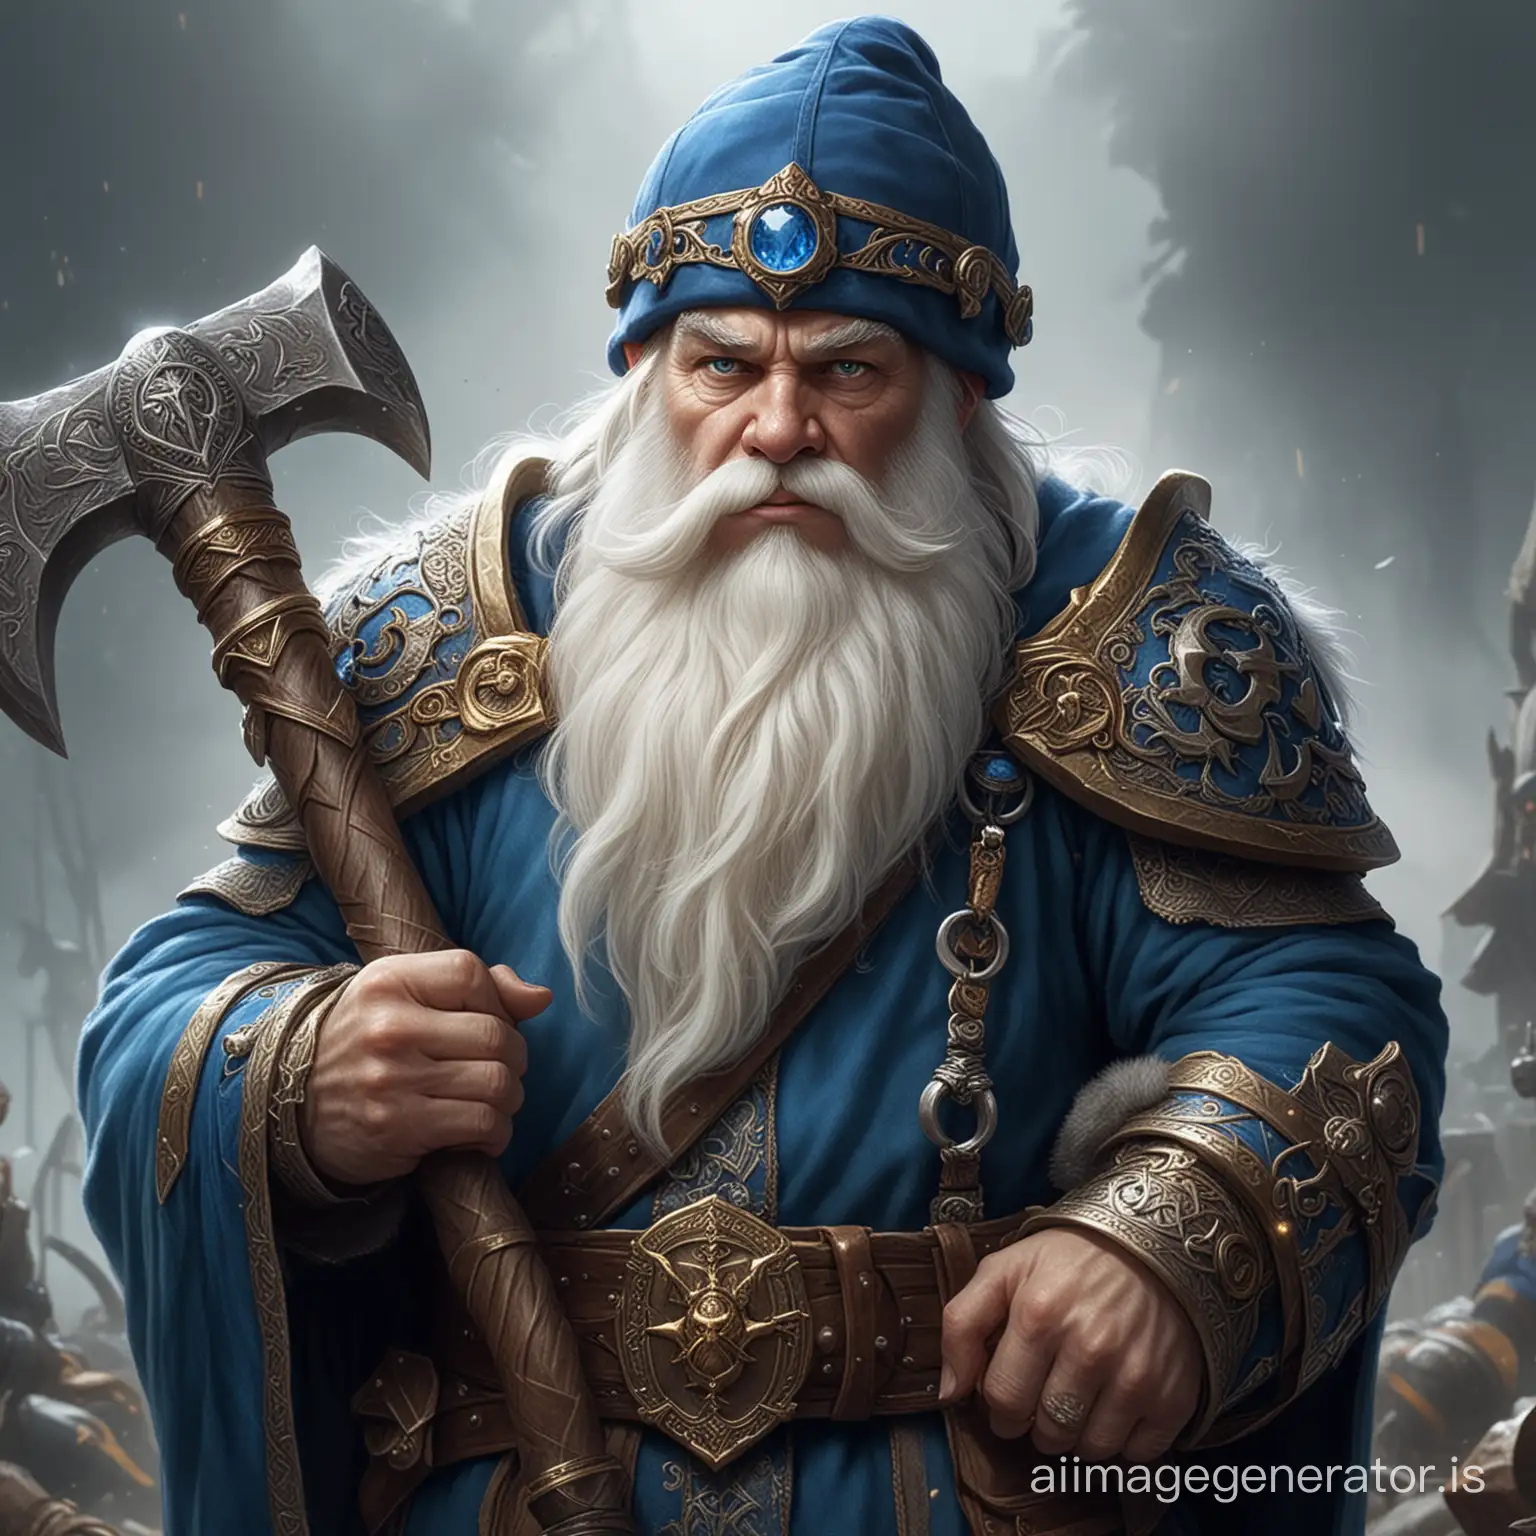 Large dwarf with a white beard and a blue hat holding an axe. He wears a armor of golden rings. He looks like from a serious fantasy-movie